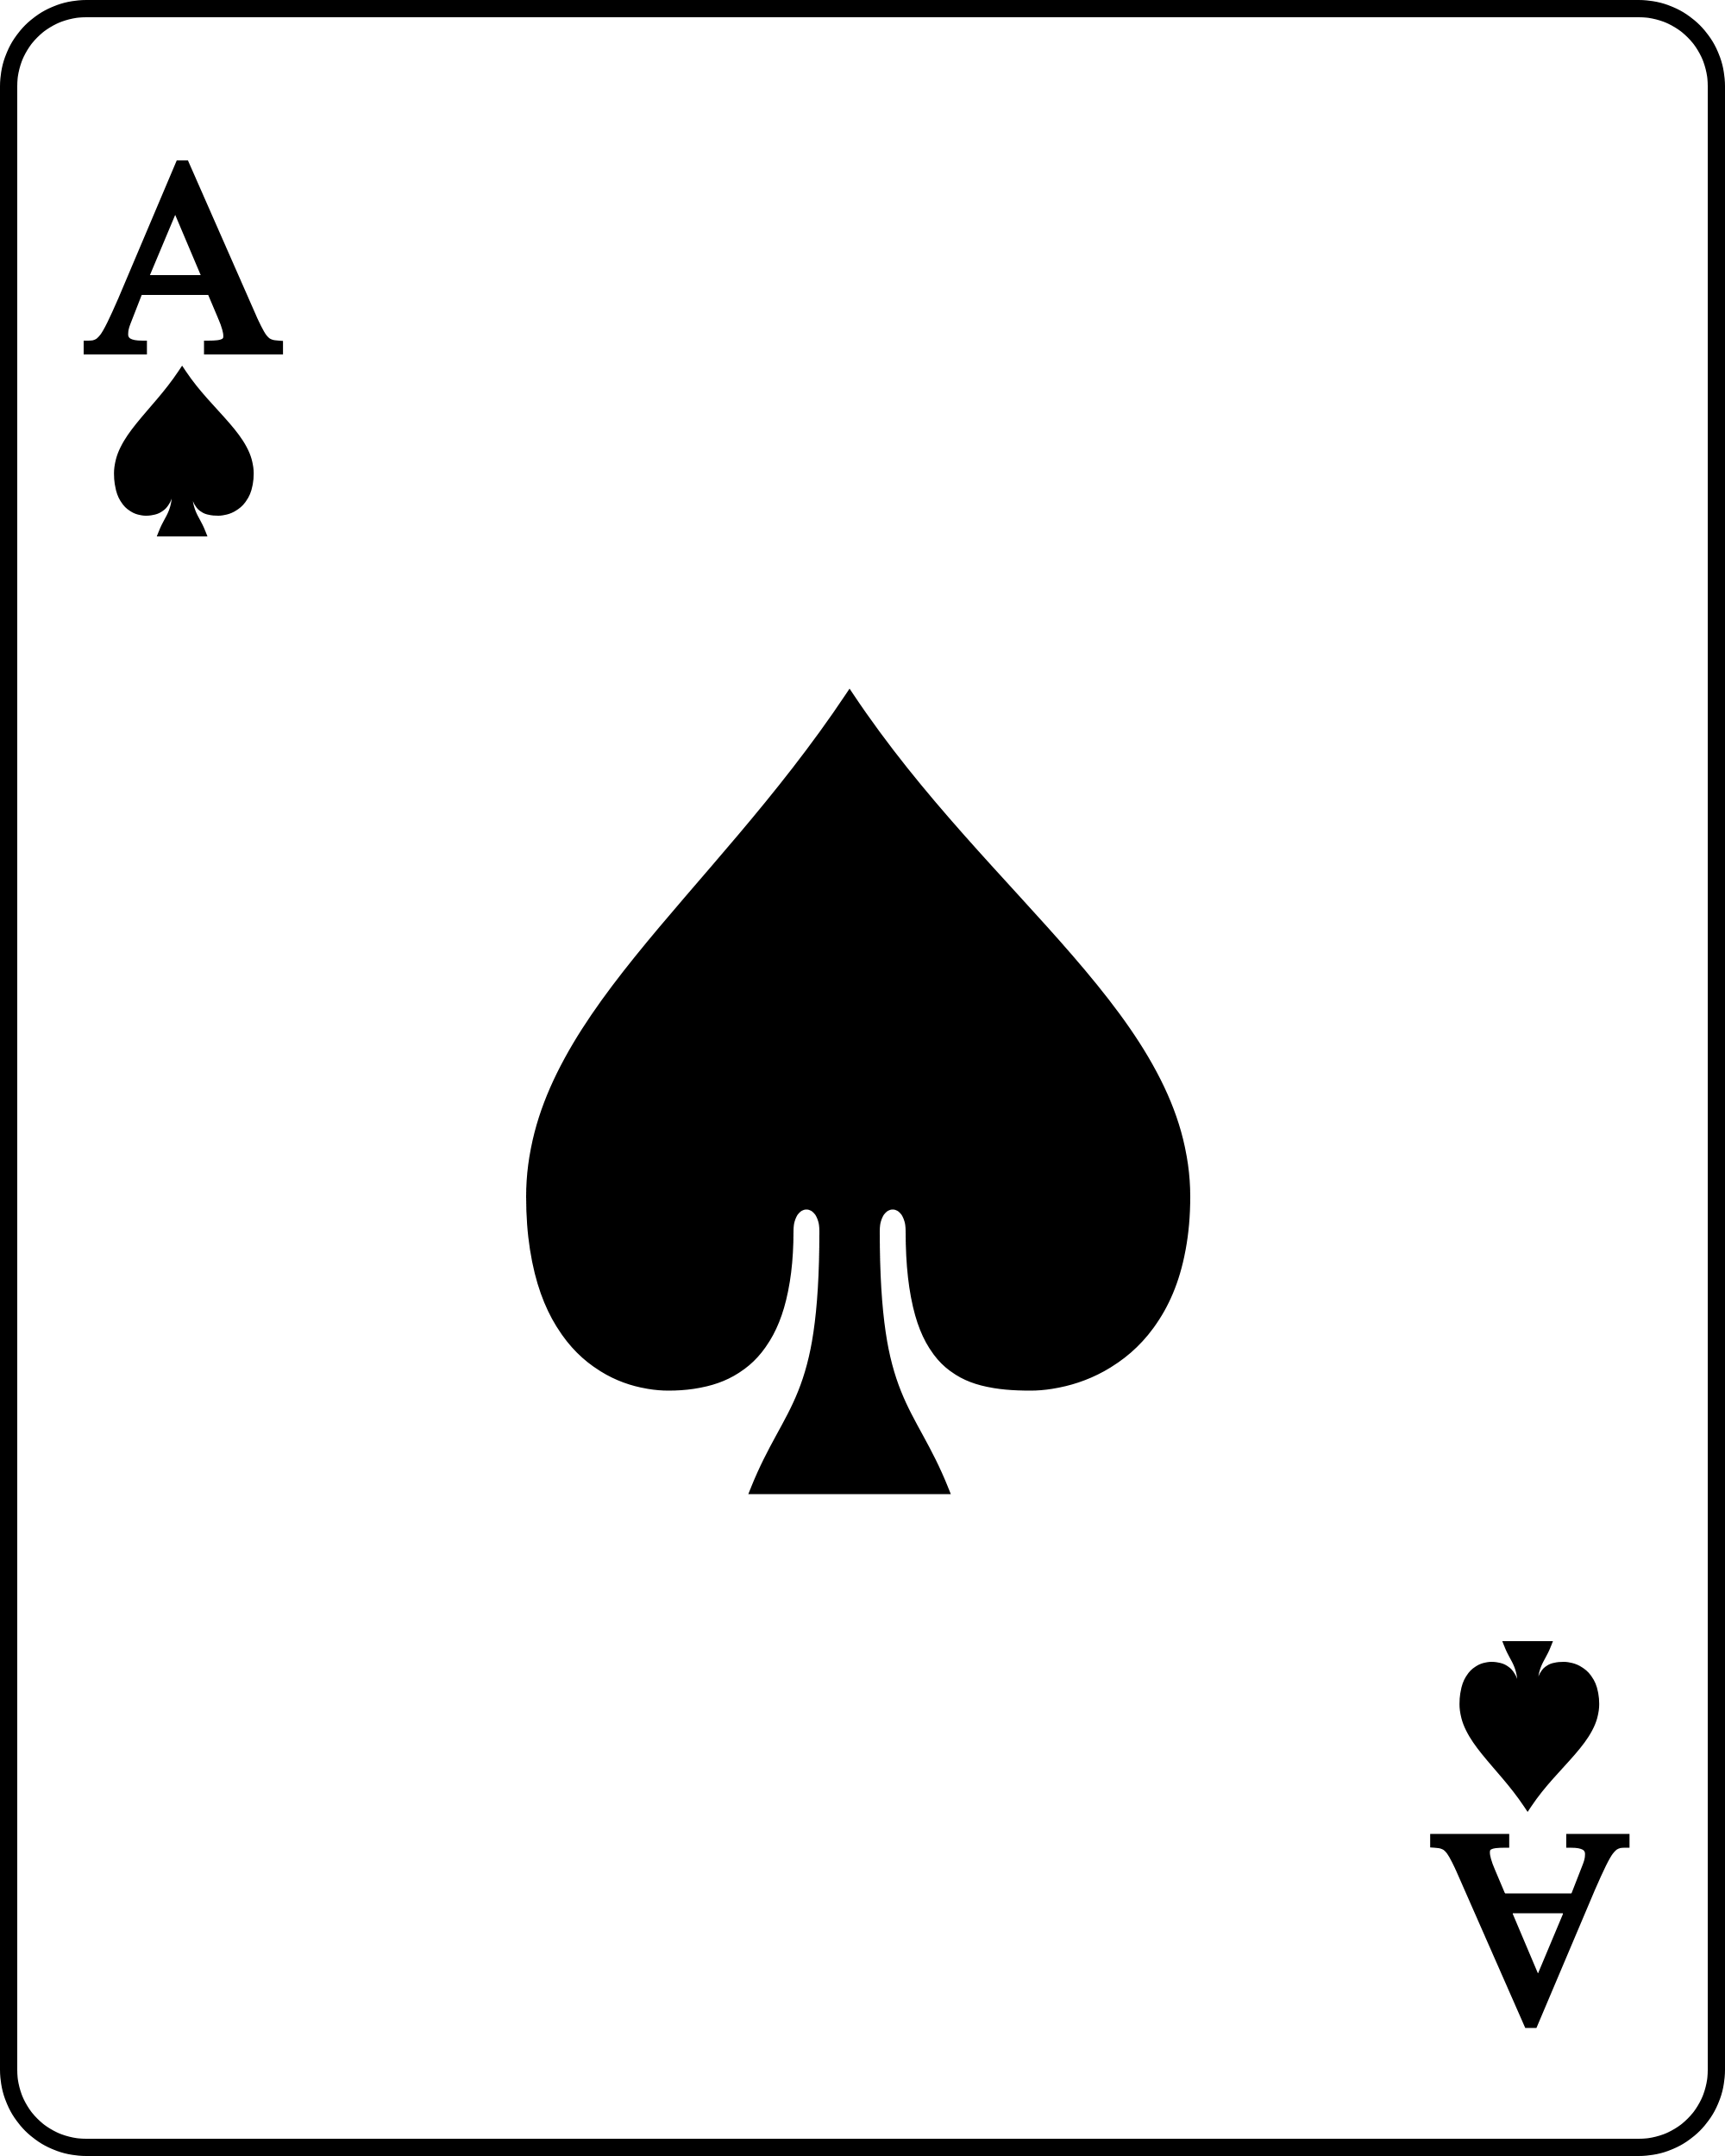 File:Playing card spade A.svg